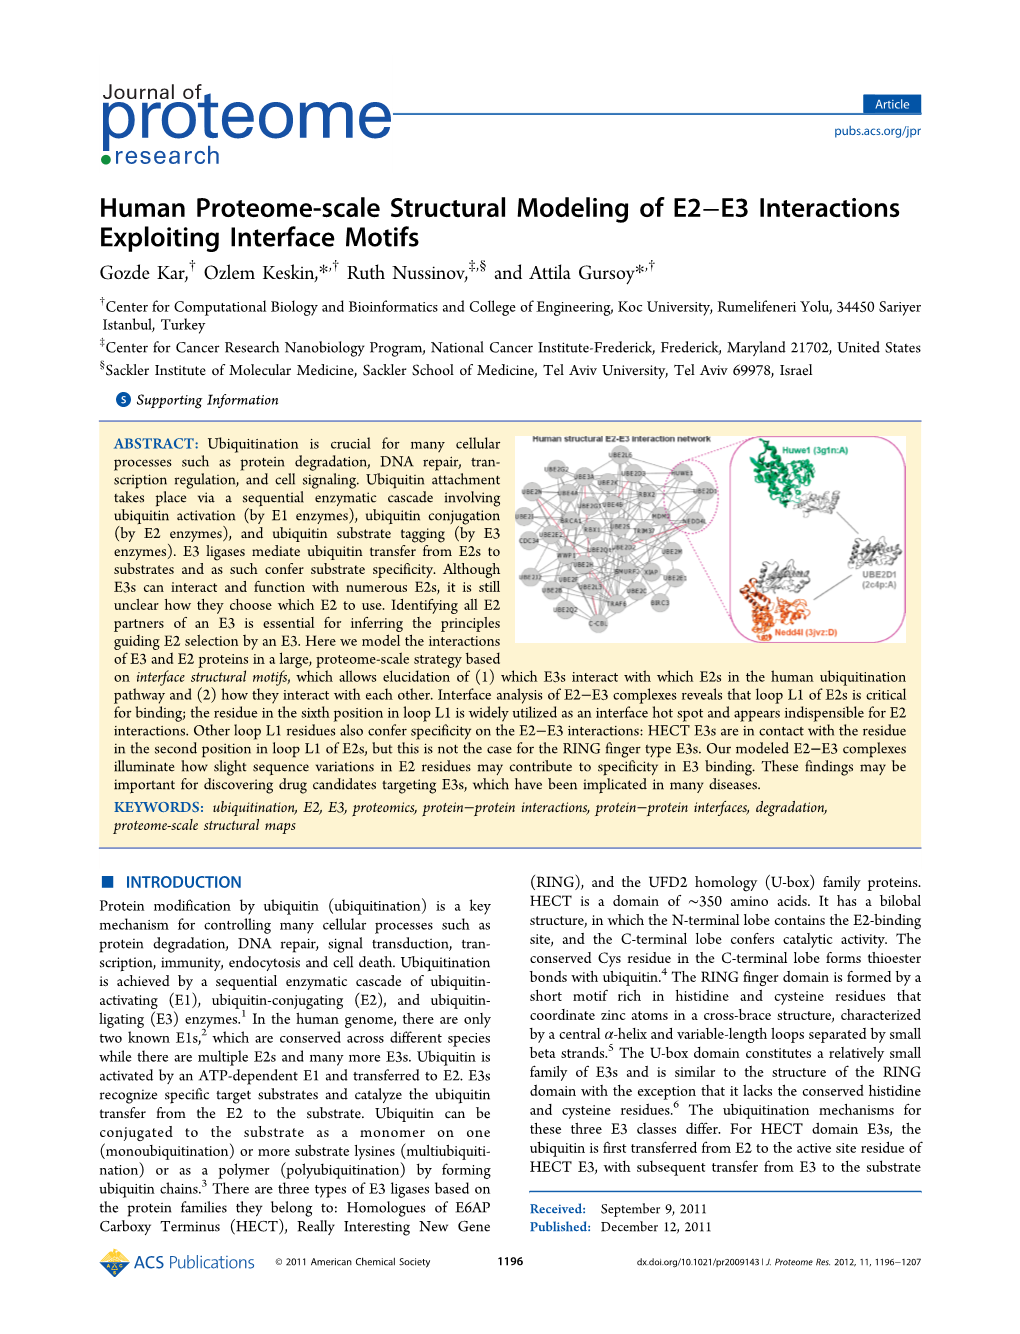 Human Proteome-Scale Structural Modeling of E2−E3 Interactions Exploiting Interface Motifs Gozde Kar,† Ozlem Keskin,*,† Ruth Nussinov,‡,§ and Attila Gursoy*,†